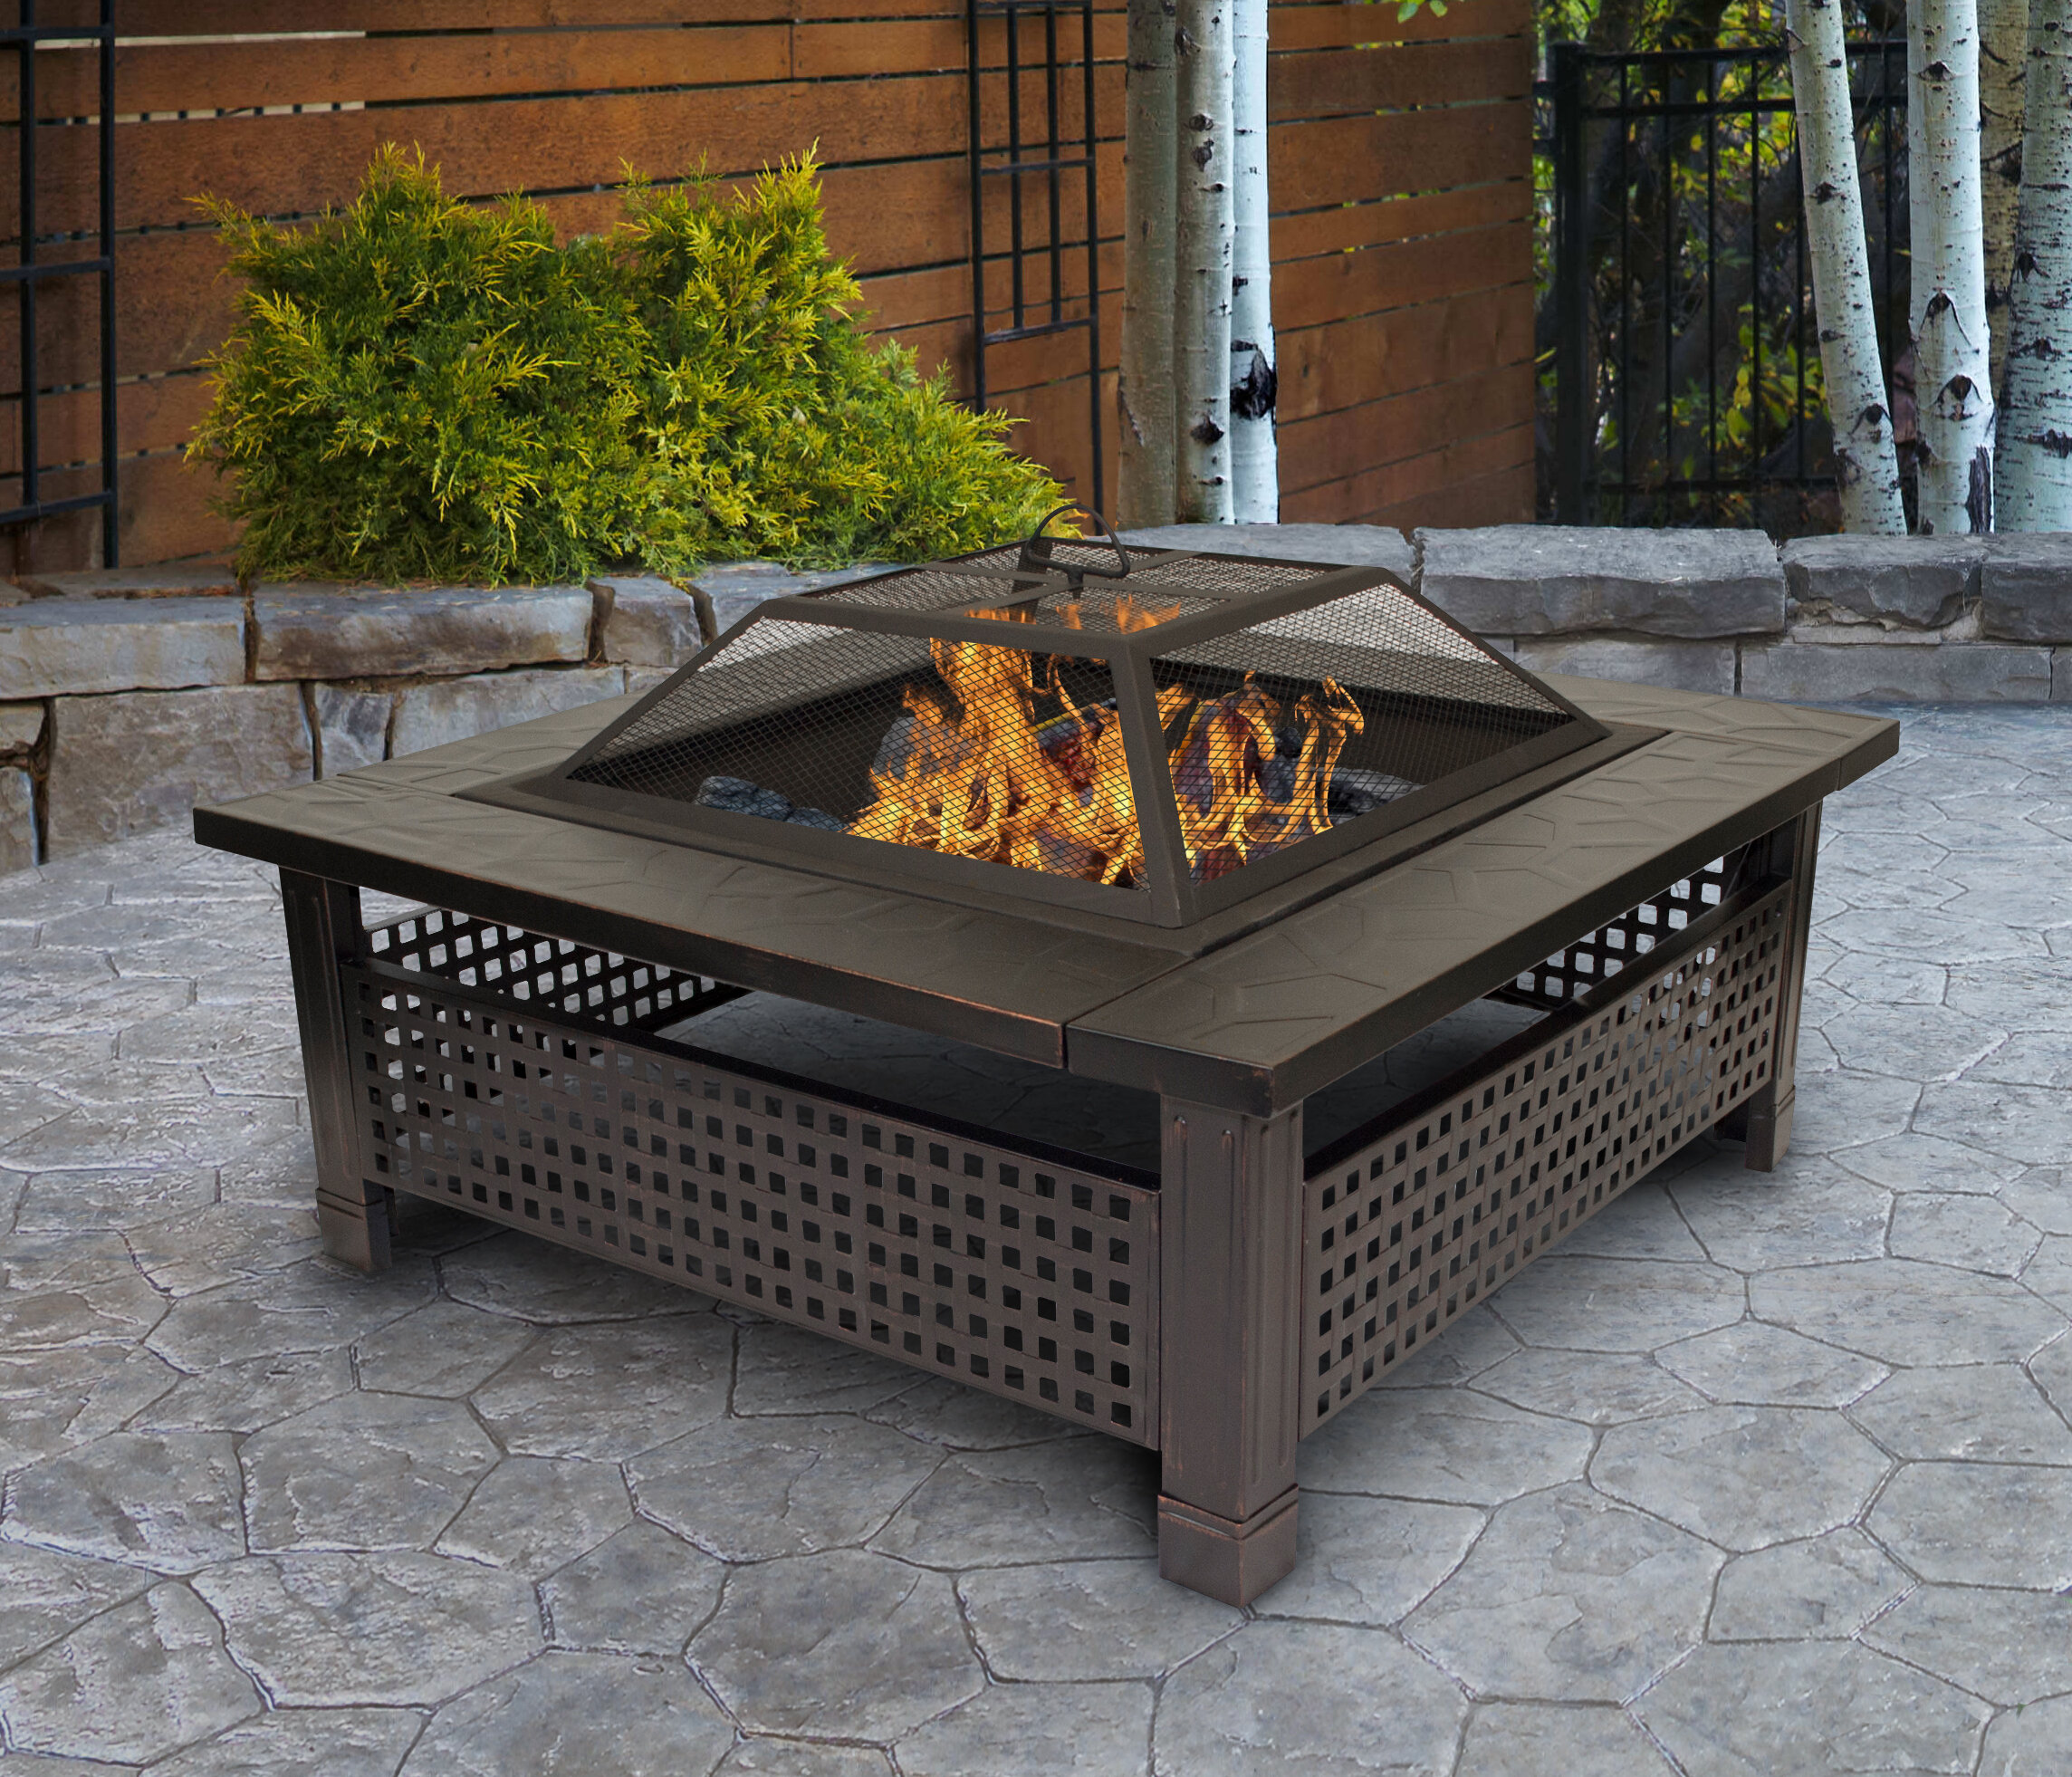 Details about   2 in 1 Fire Pit and BBQ 34x34x48 cm Steel